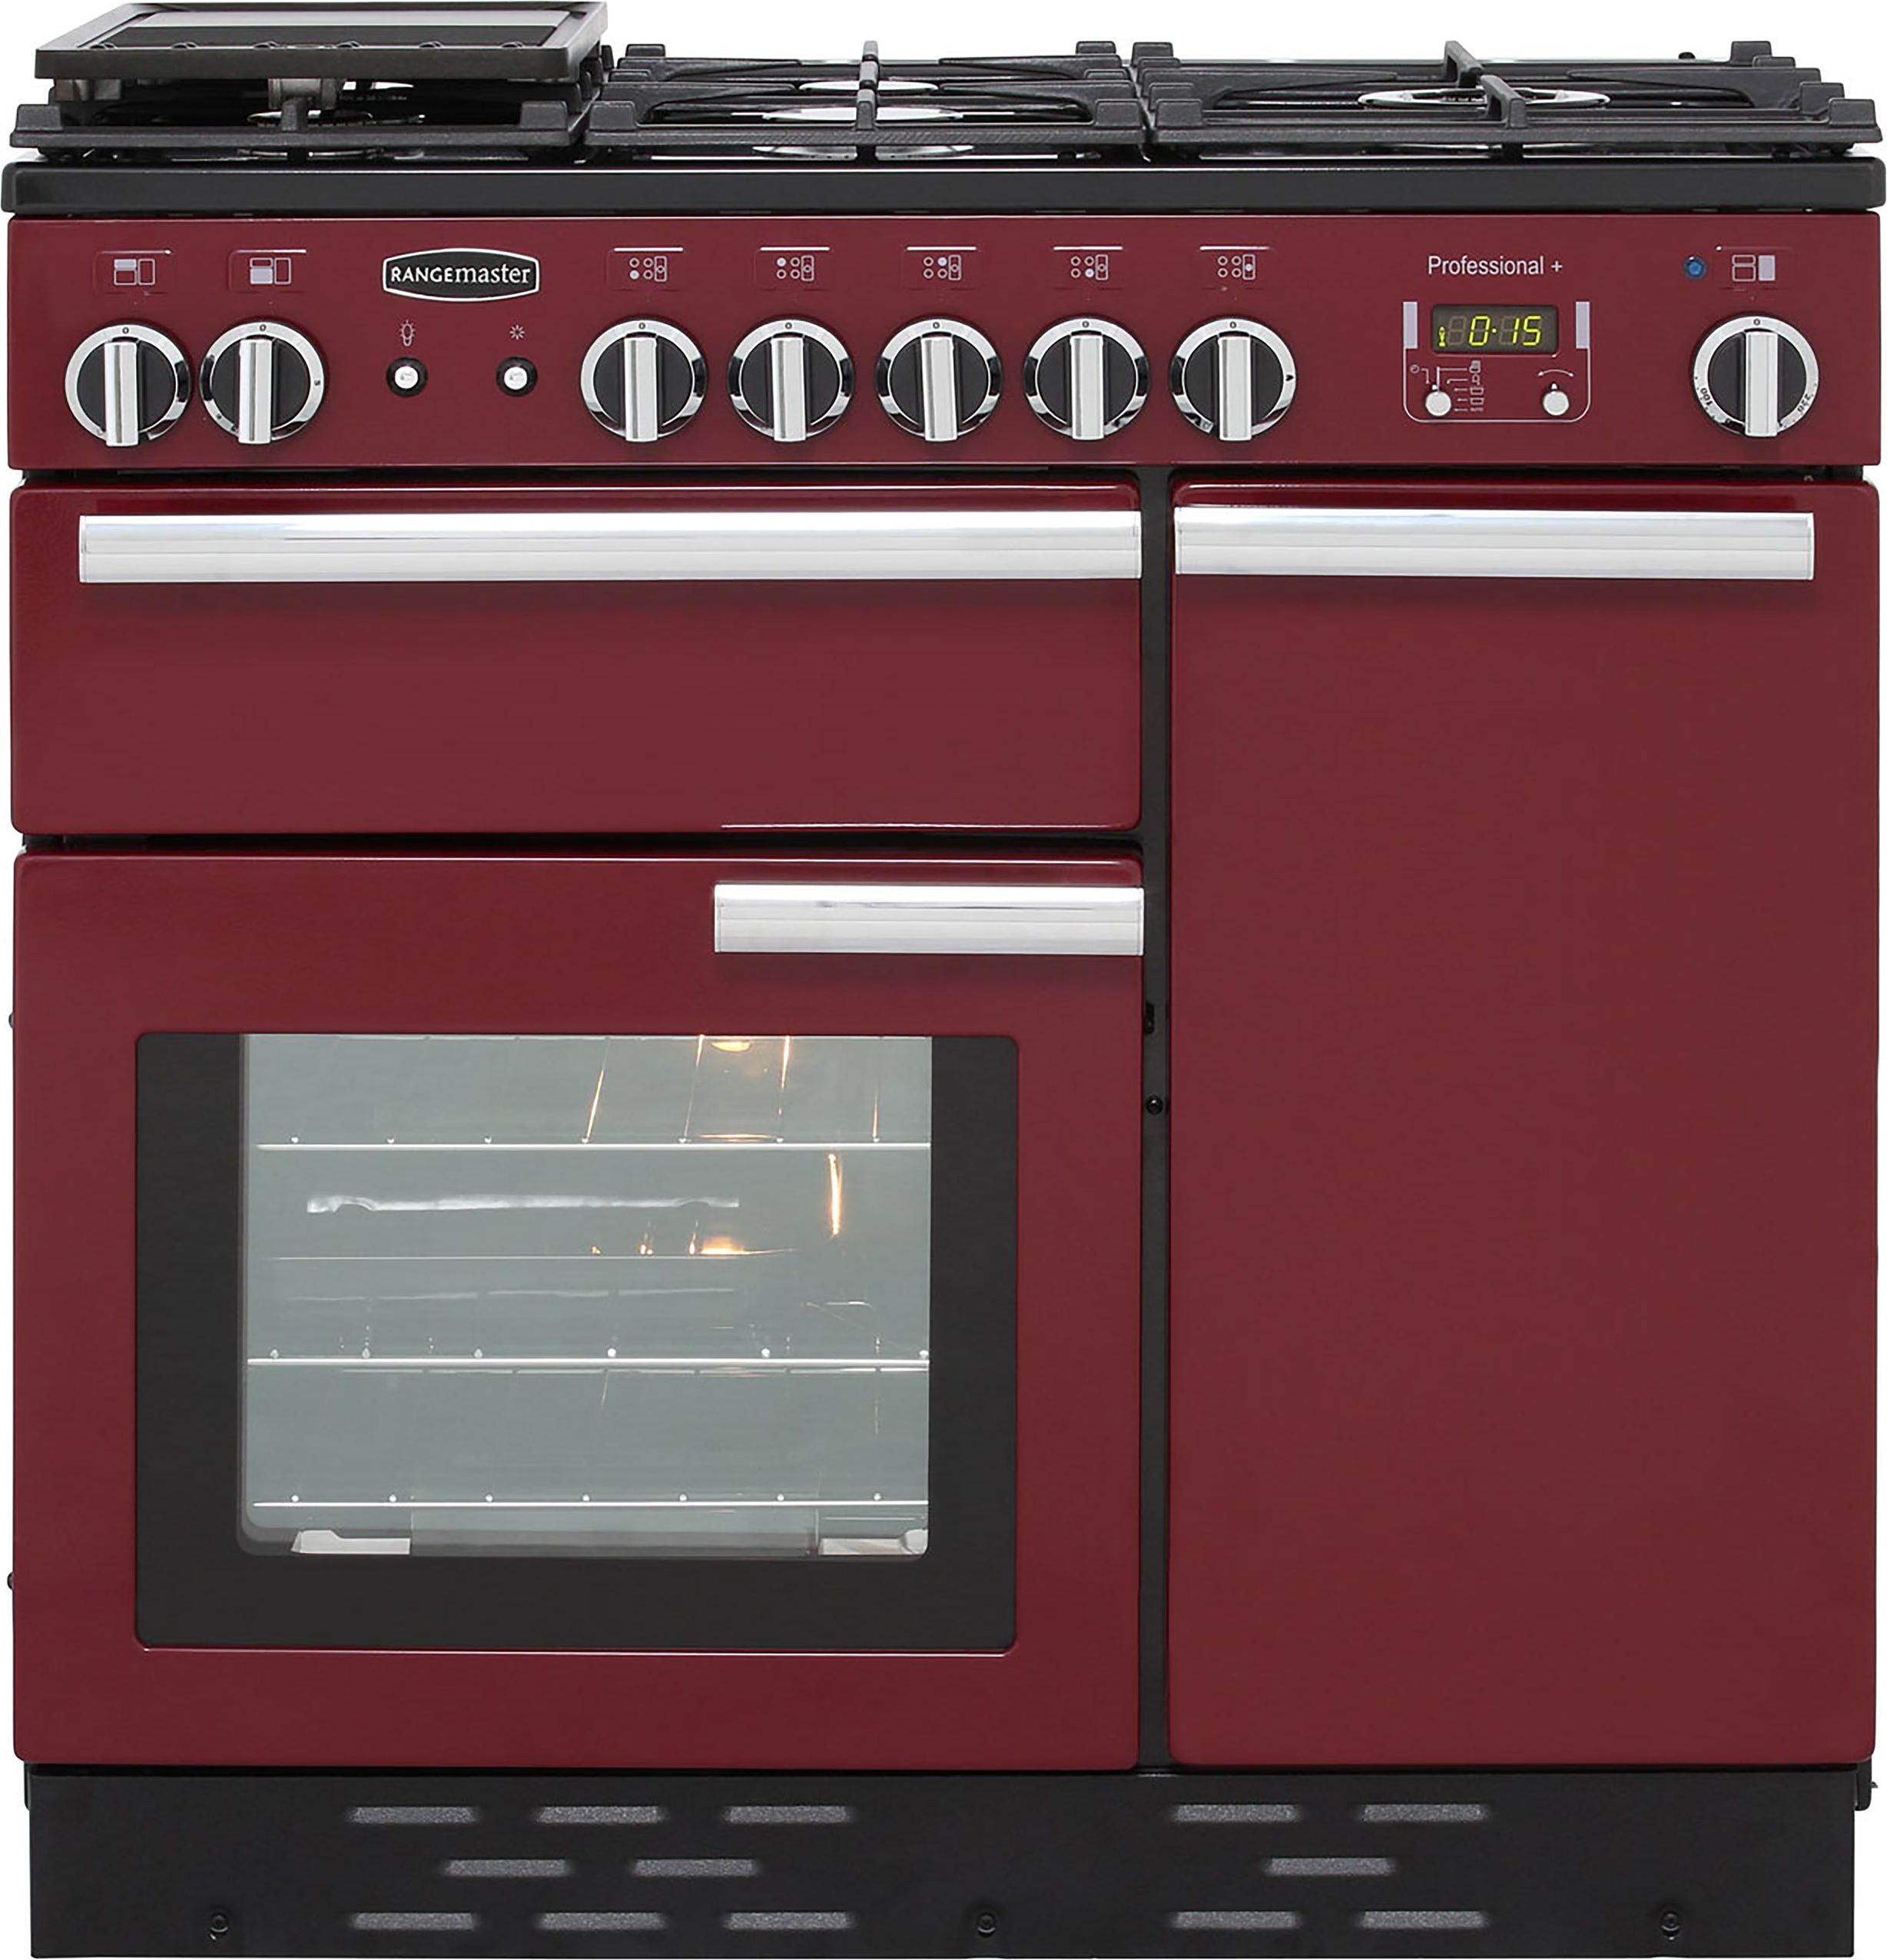 Rangemaster Professional Plus PROP90NGFCY/C 90cm Gas Range Cooker with Electric Fan Oven - Cranberry - A+/A Rated, Red